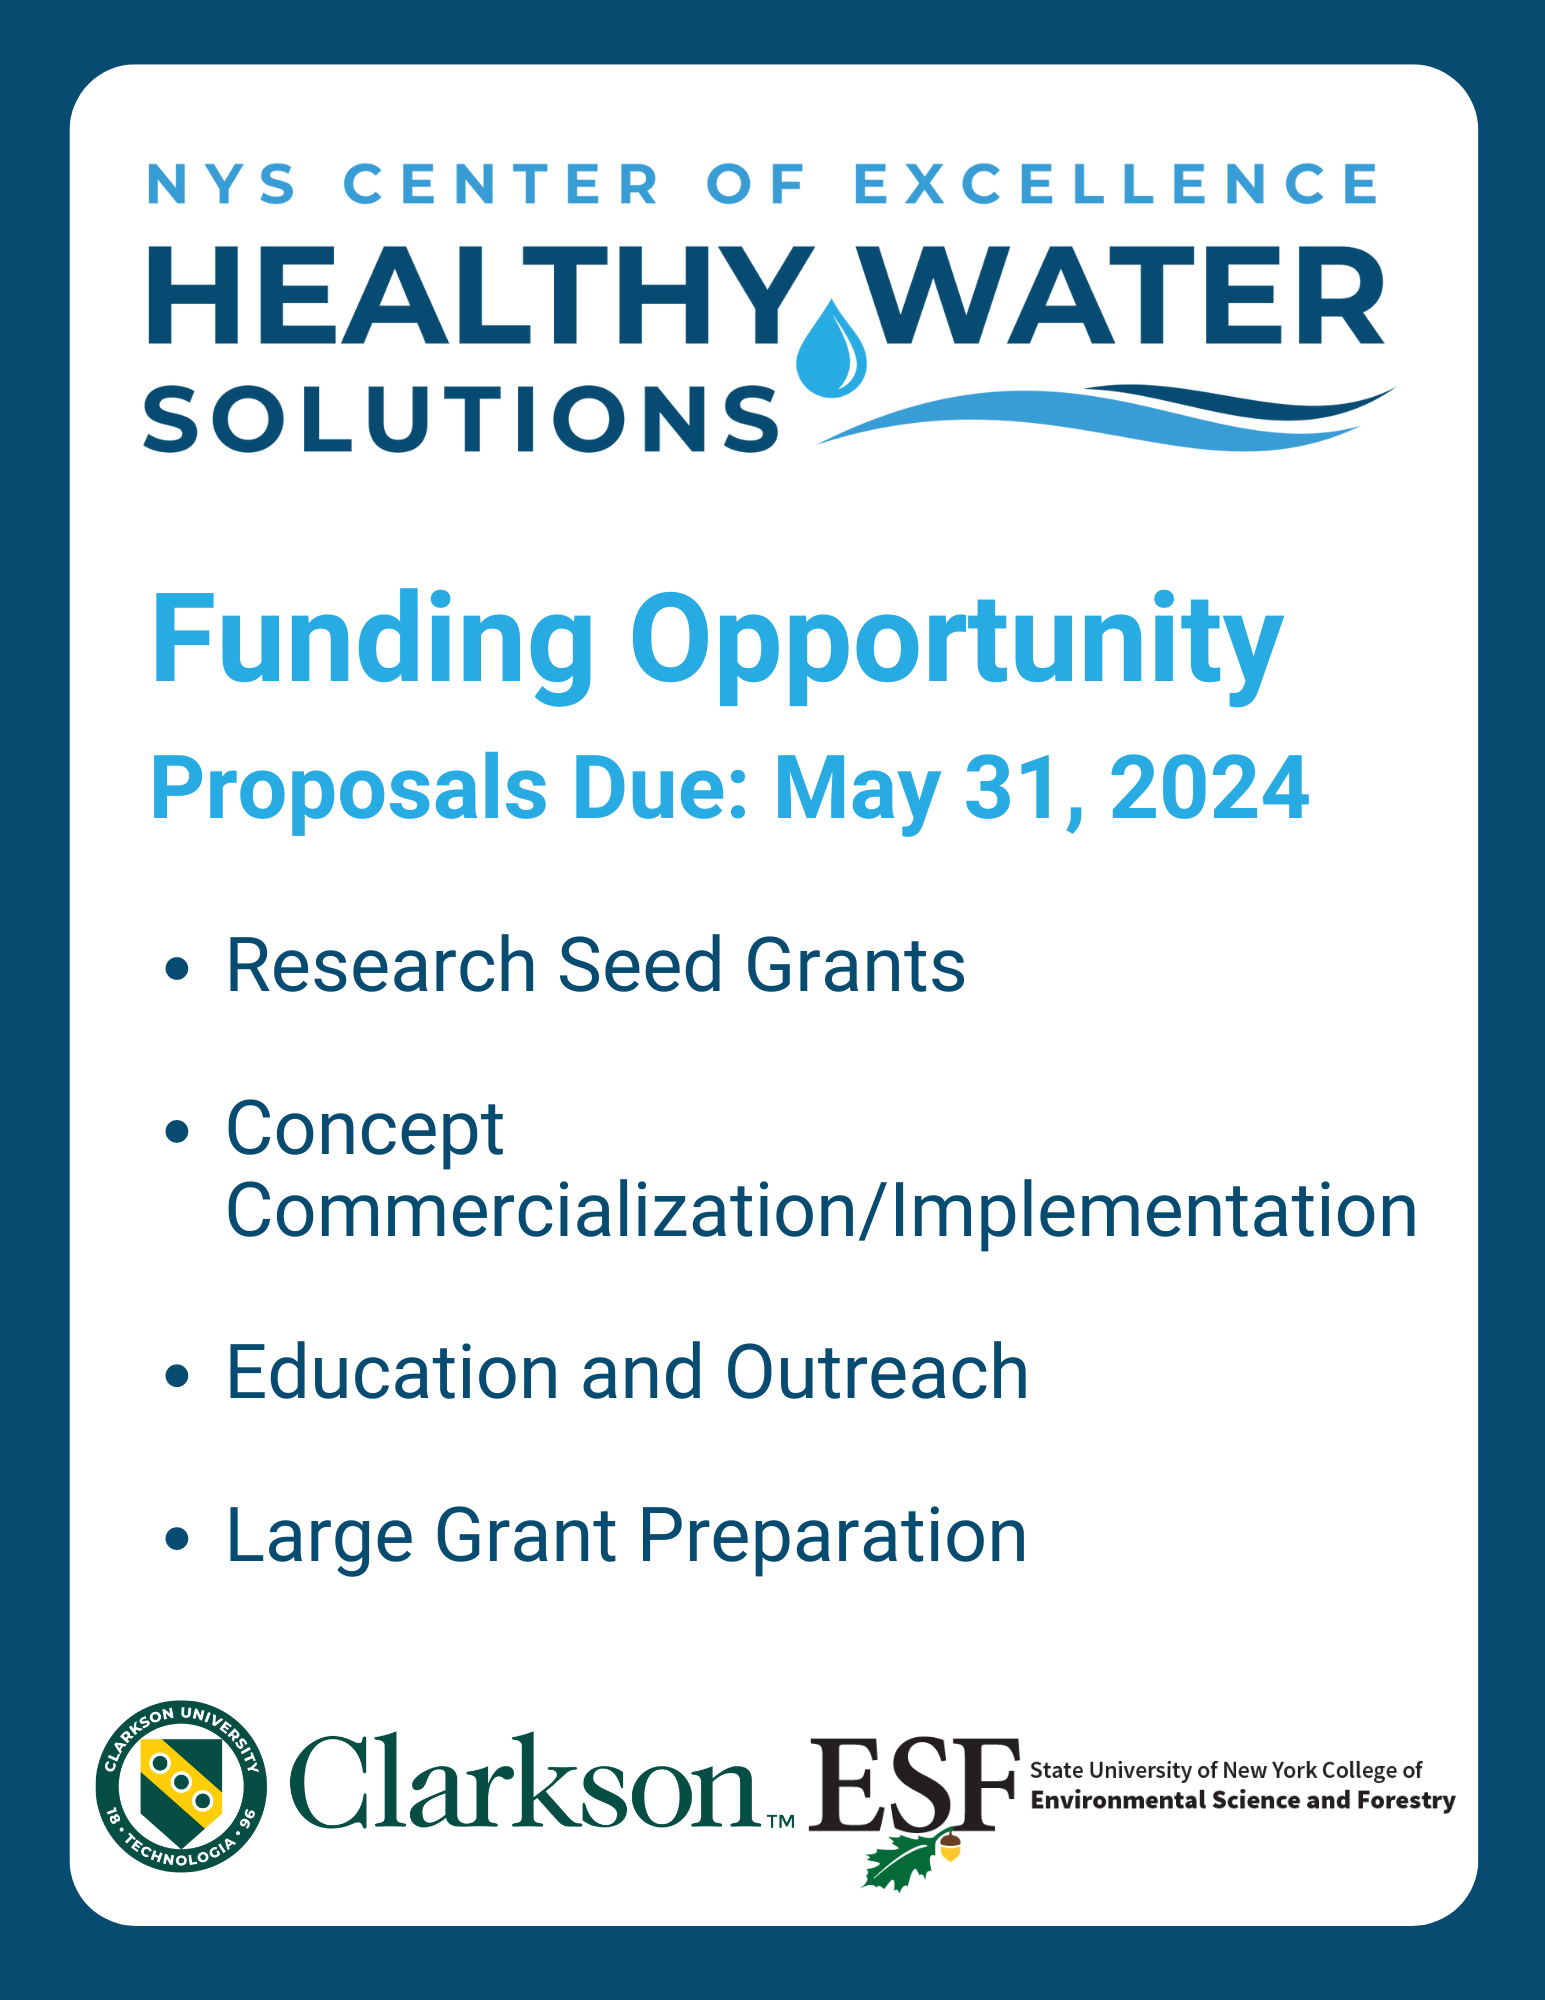 Proposals Due Friday 5/31 to NYS Center of Excellence in Healthy Water Solutions